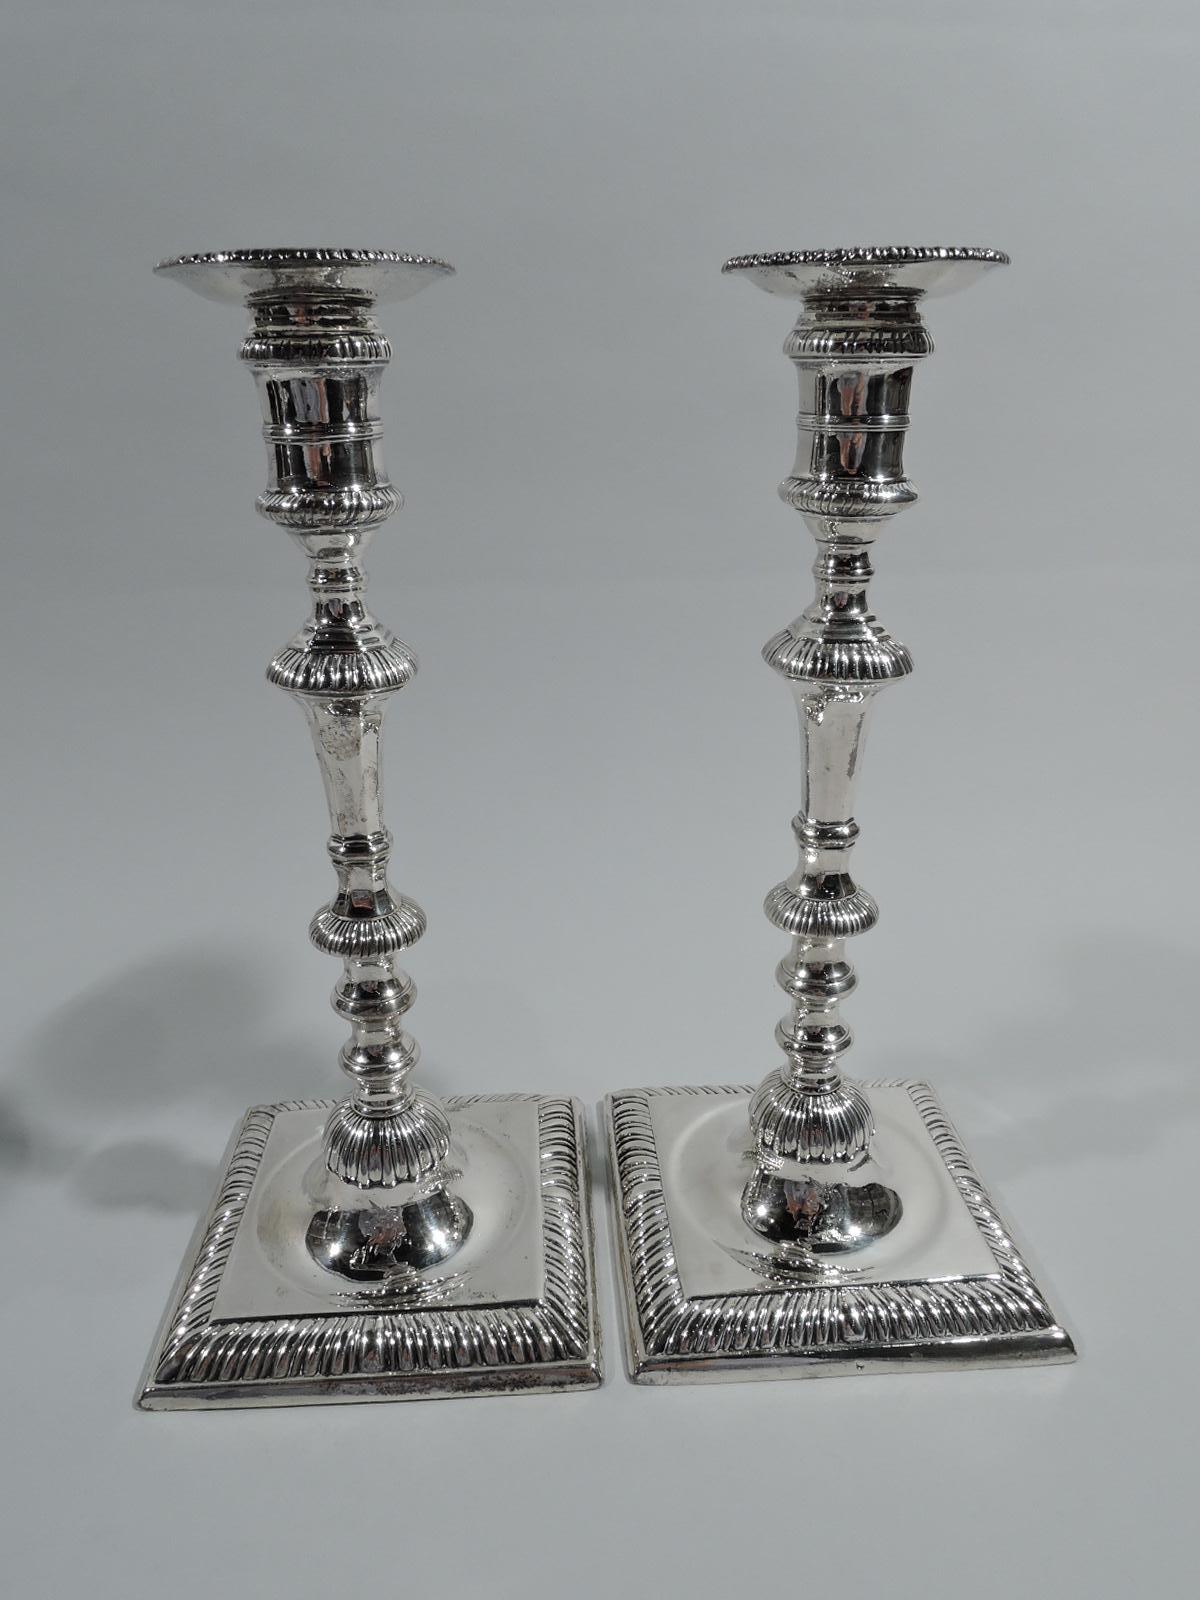 Set of 4 George III sterling silver candlesticks. Made by William Cafe in London in 1763. Each: Girdled spool socket with detachable bobeche. Faceted and knopped tapering shaft on raised foot flowing into concave circle on square base. Gadrooning.